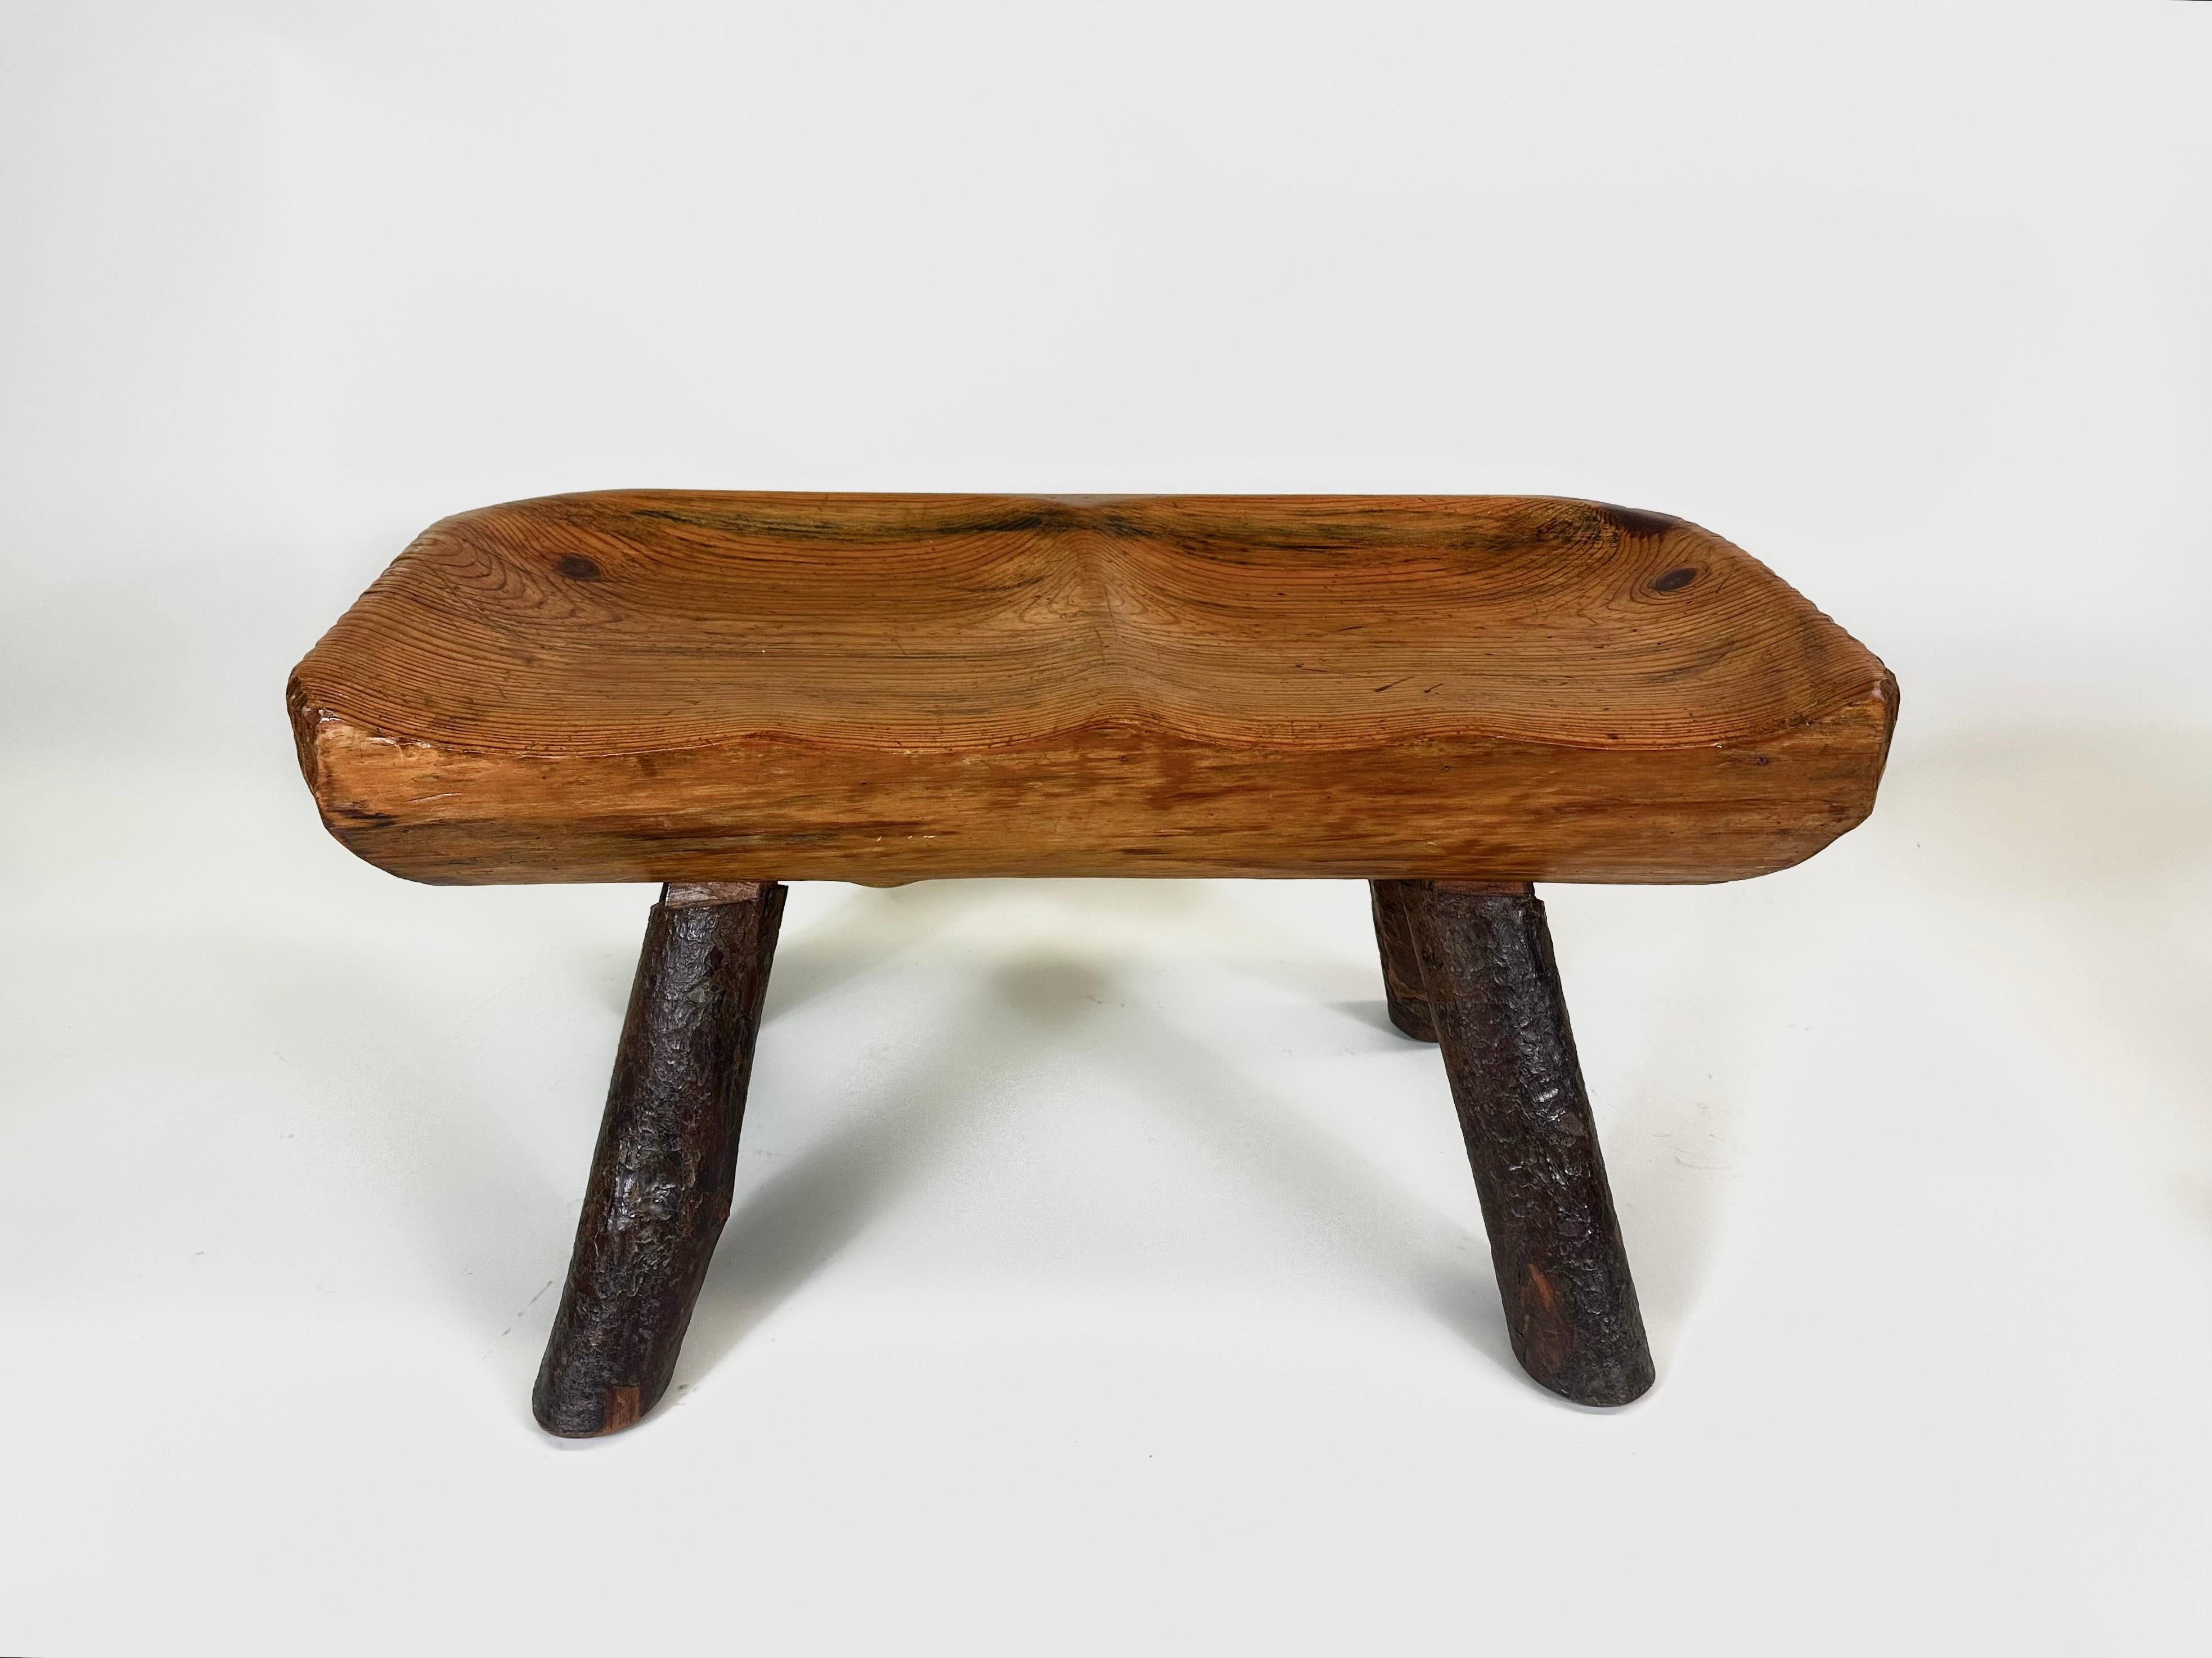 20th Century 2 Rare Italian Modern Craftsman Alpine Benches in Hand Carved Cypress For Sale